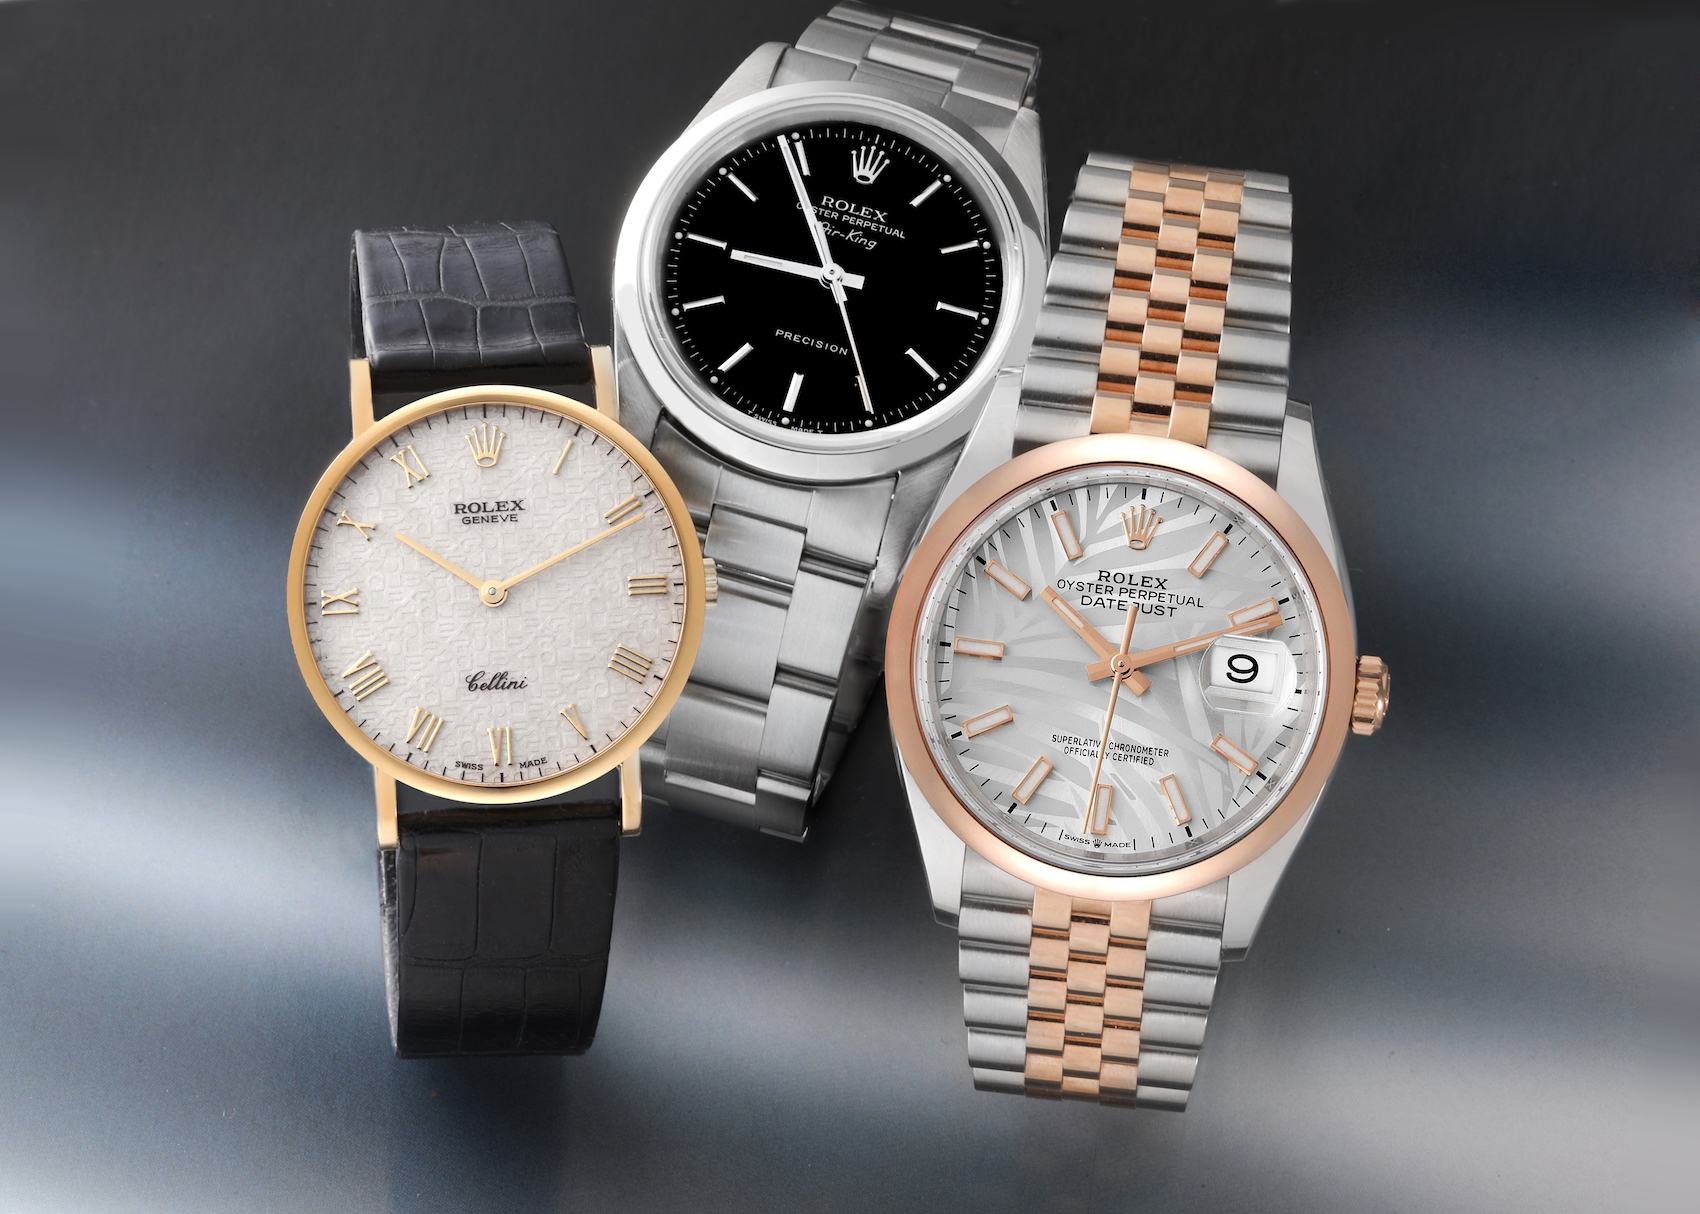 Types of Watch Bands - Rolex Cellini, Air-King, and Datejust